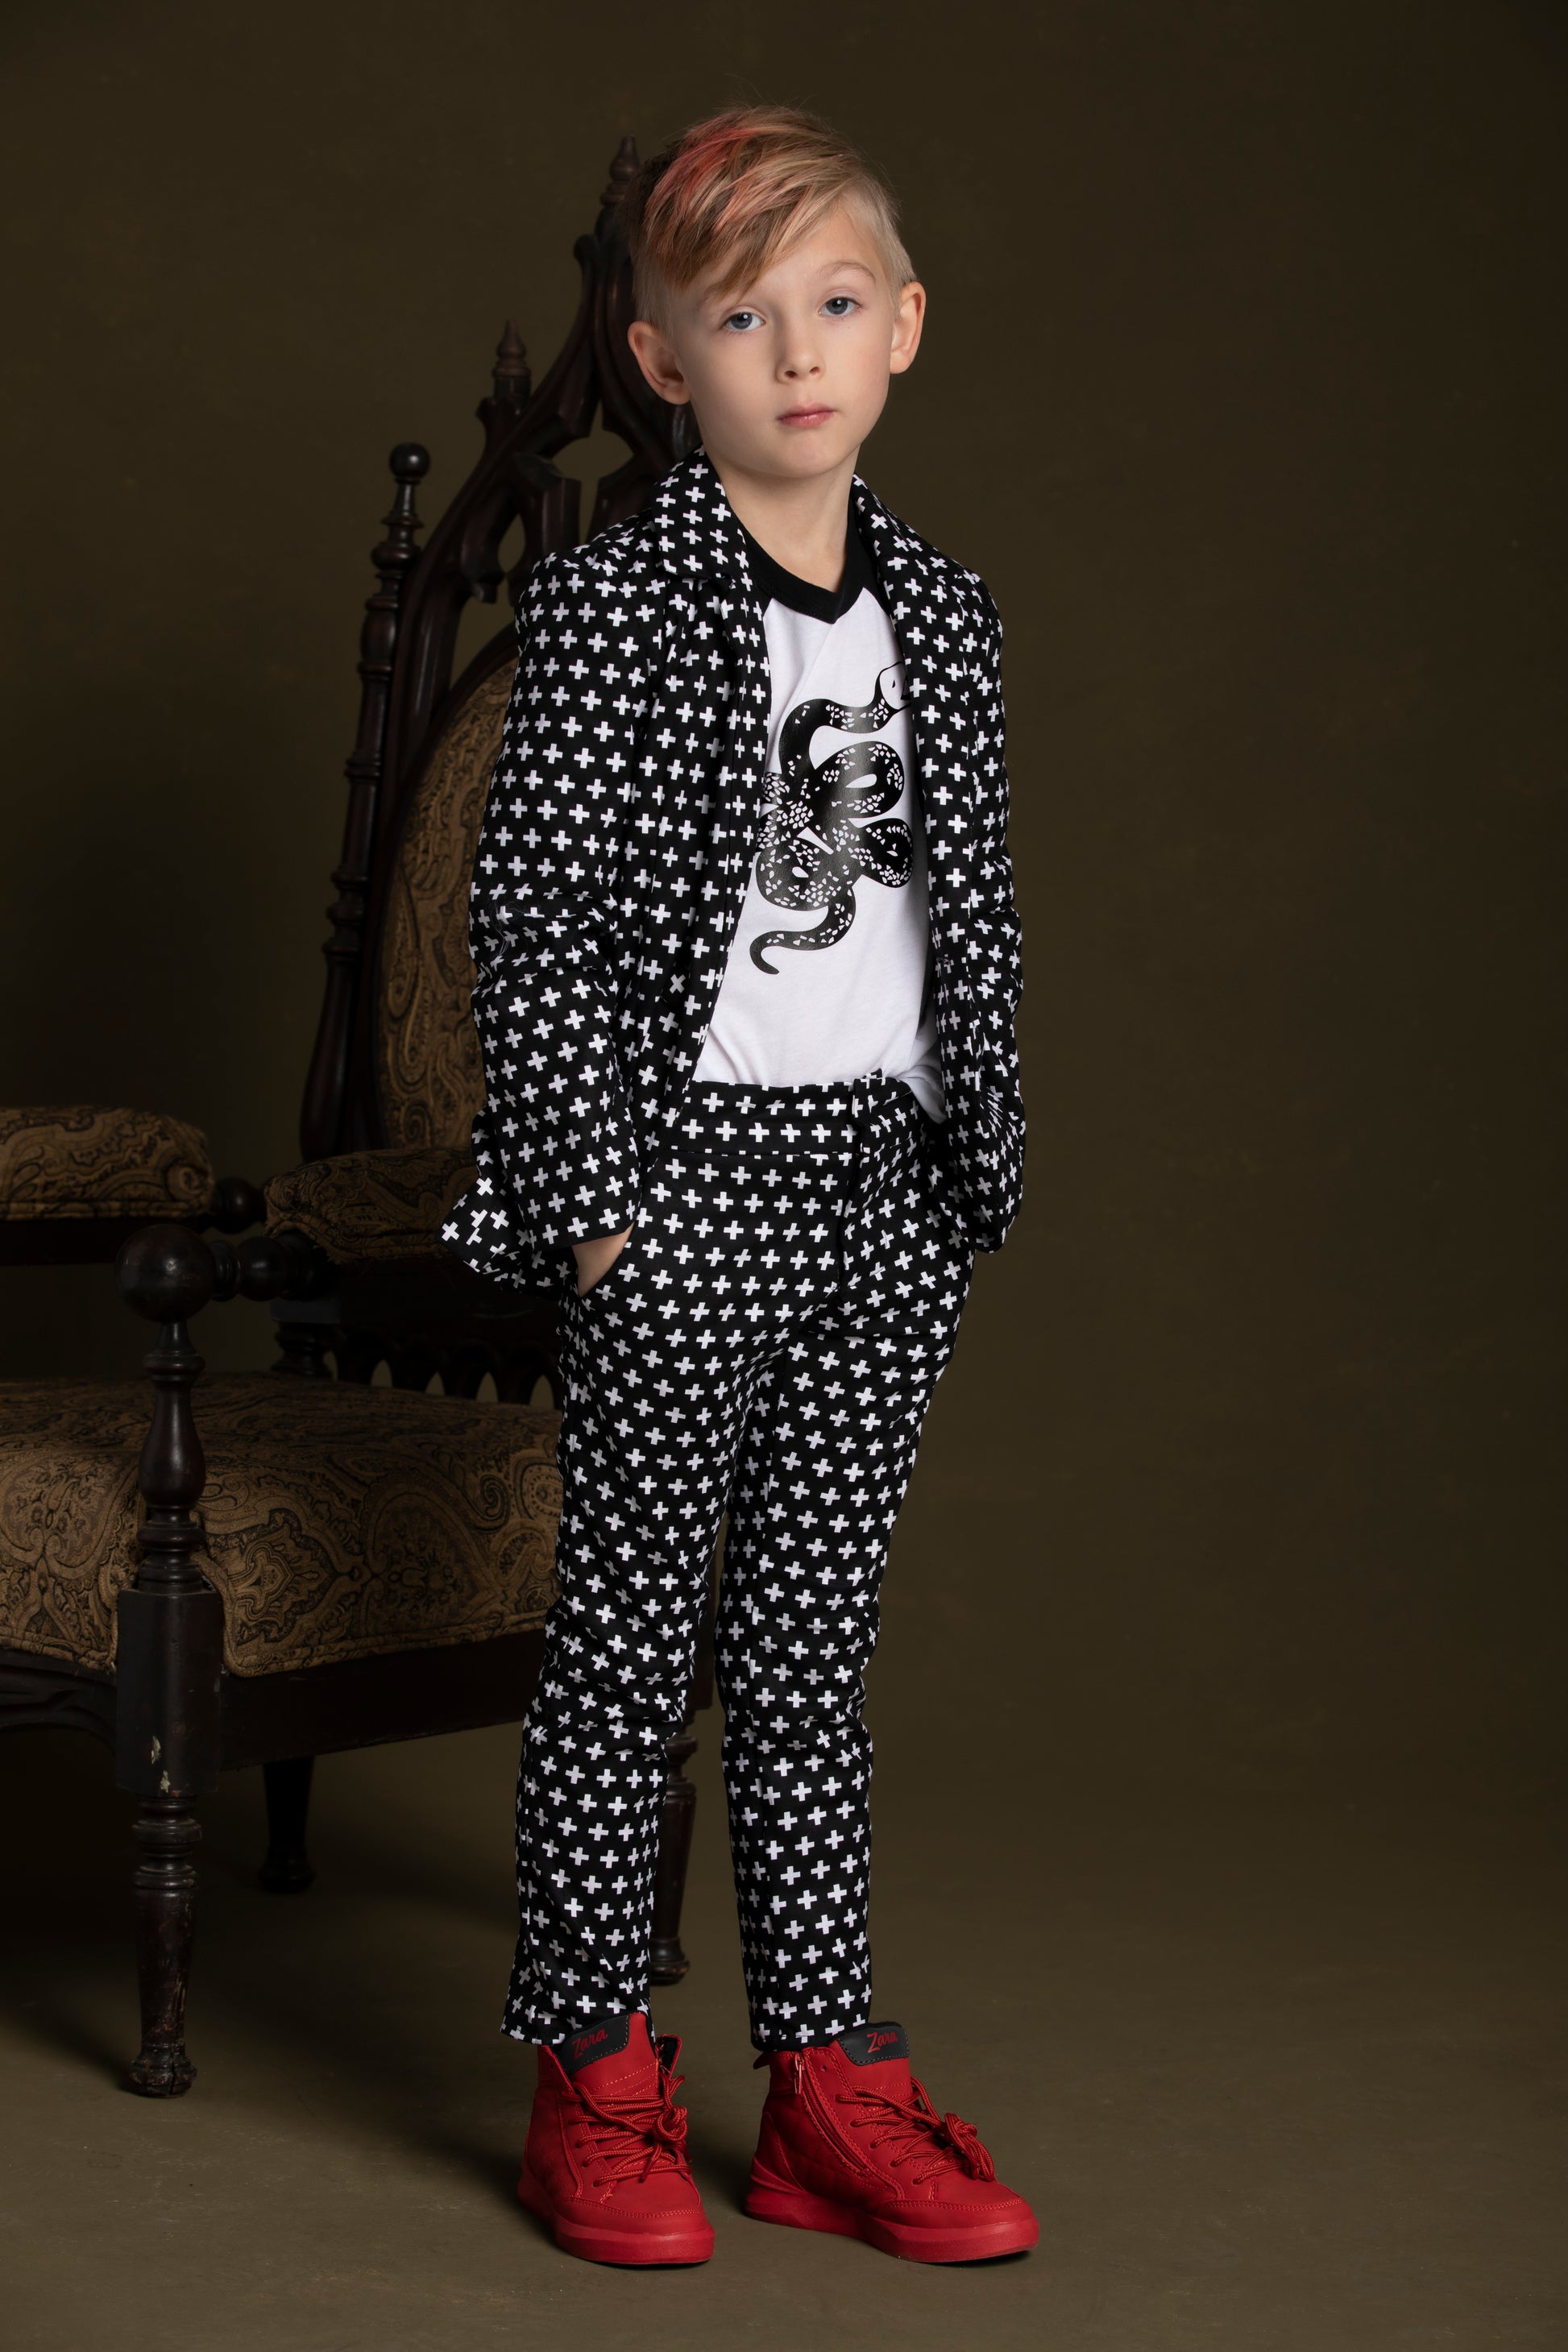 Young boy poses the Plus Print Blazer alongside a Snake T-Shirt, Suit Vest, and matching Suit Pants